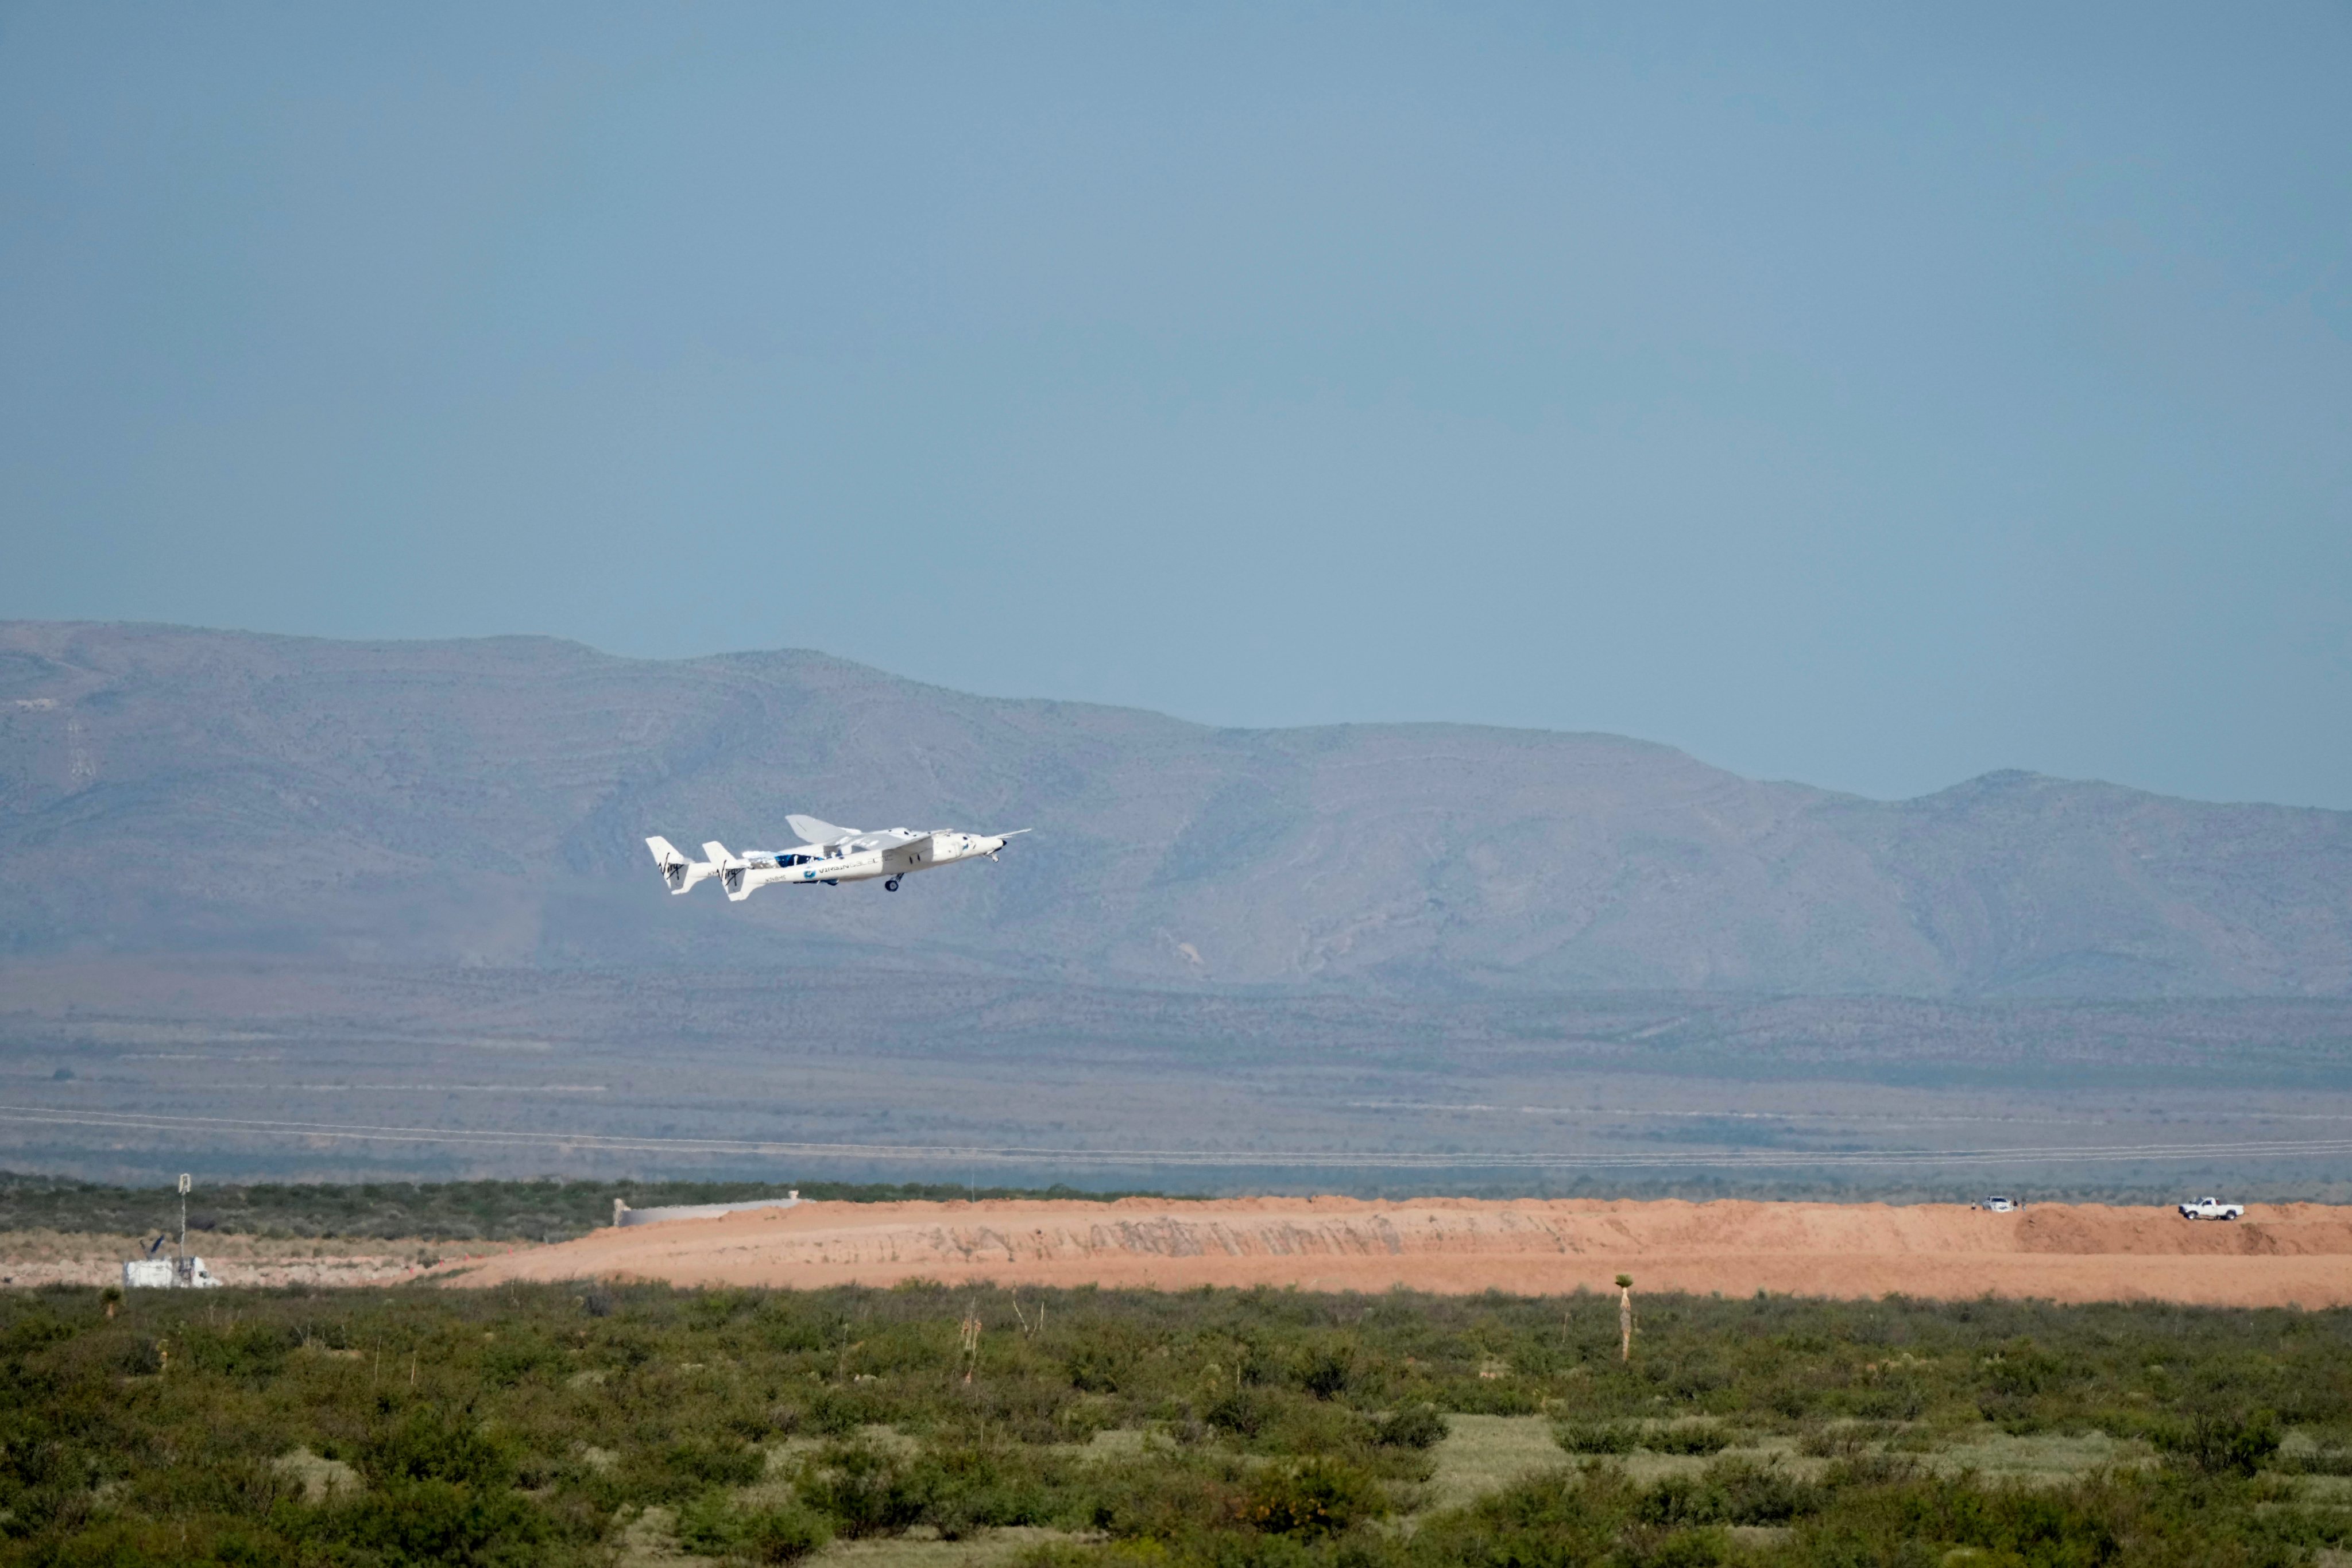 Virgin Galactic&#039;s Space Plane VSS Unity Launches Richard Branson To Edge Of Space From New Mexico